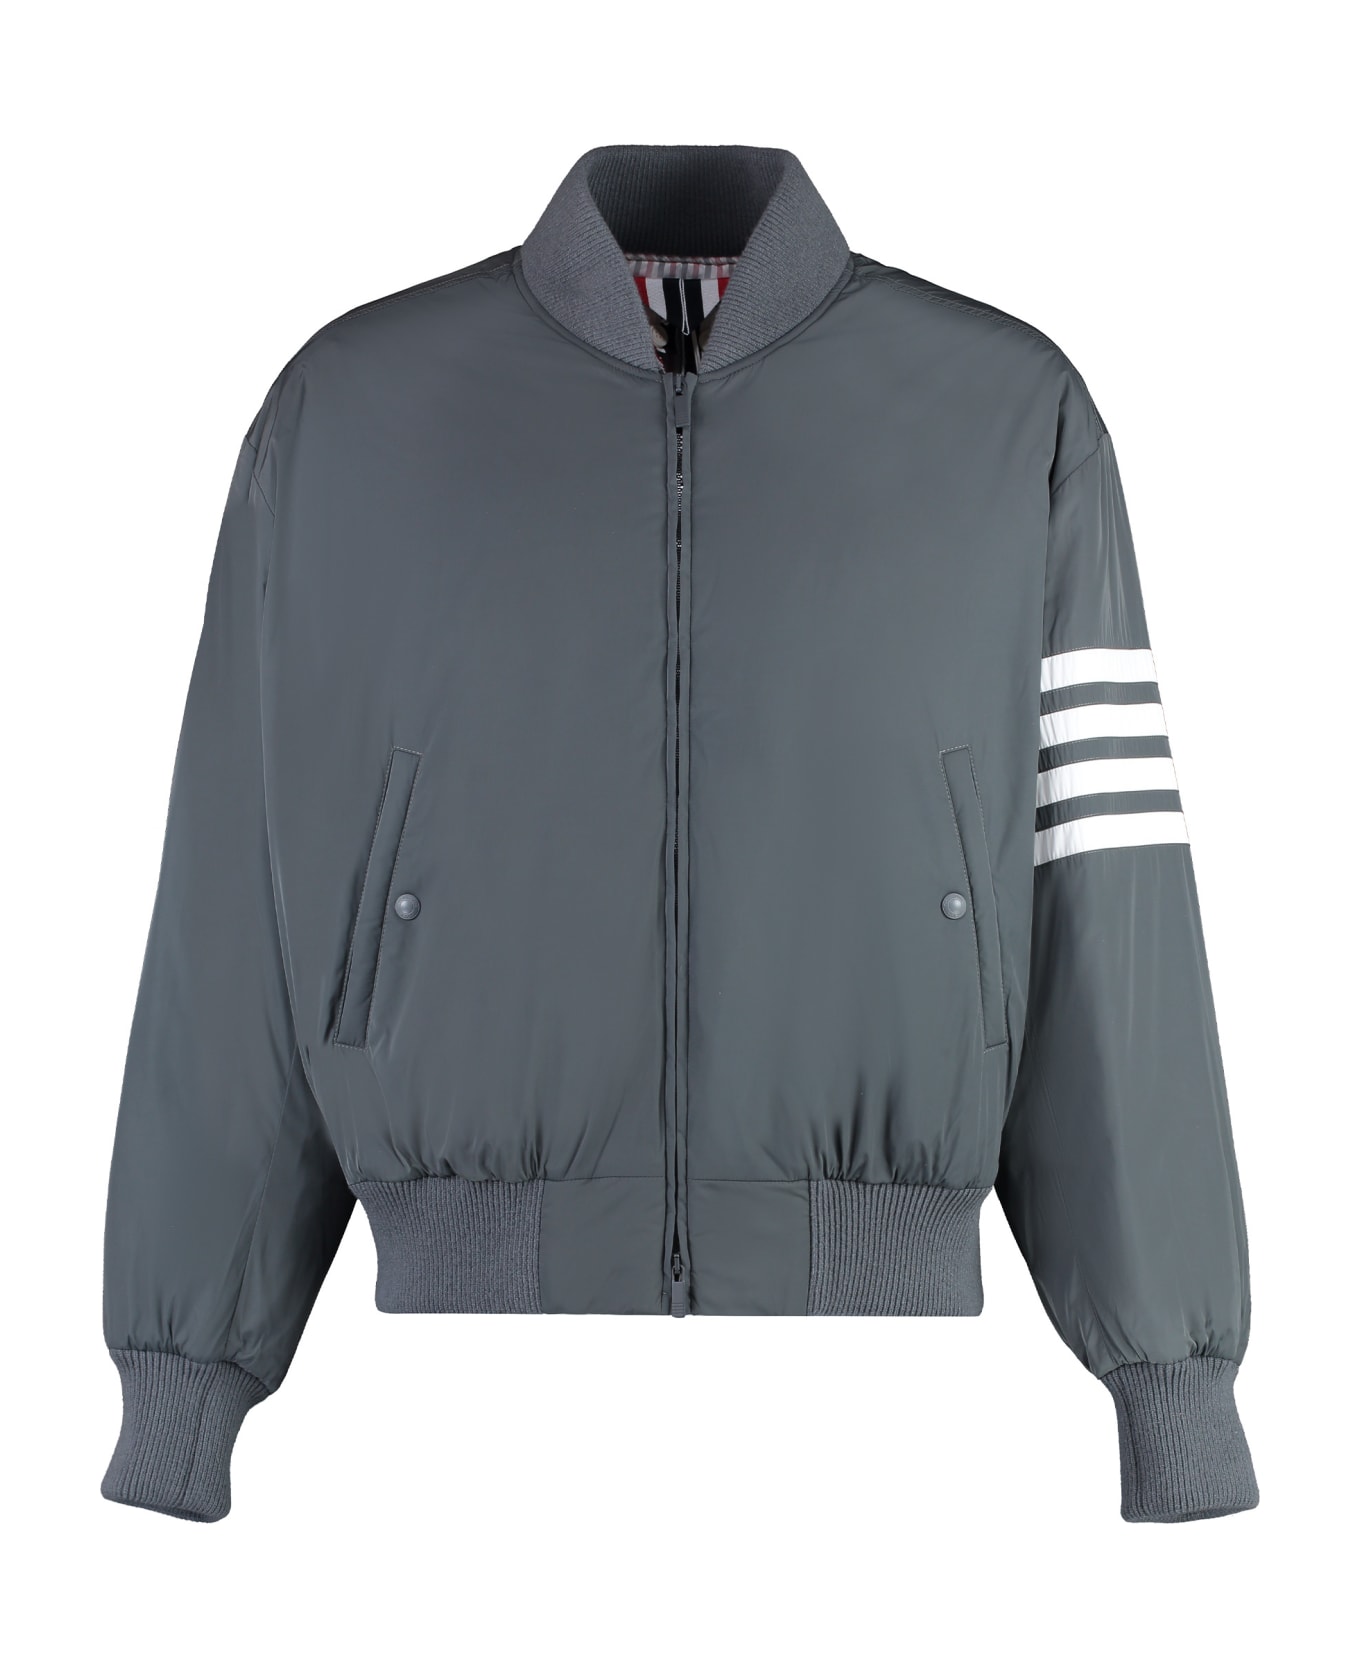 Thom Browne Bomber Jacket In Technical Fabric - grey ジャケット